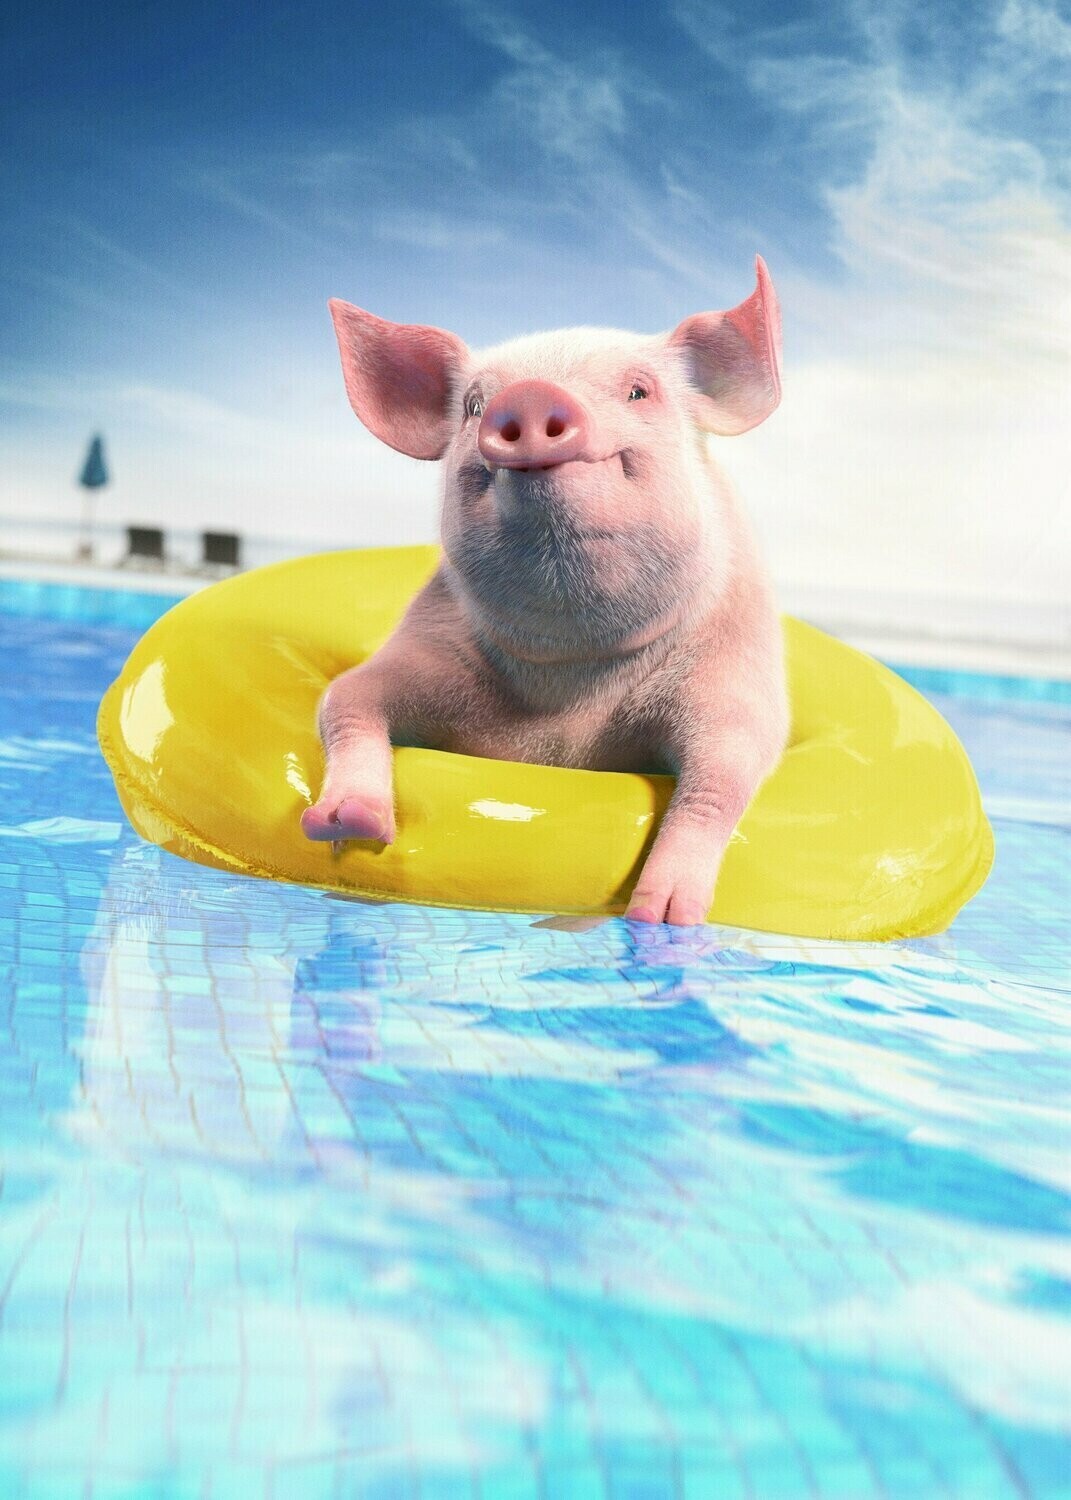 Pig in a Pool - Specially ordered for you. Delivery is approximately 4 - 6 weeks.